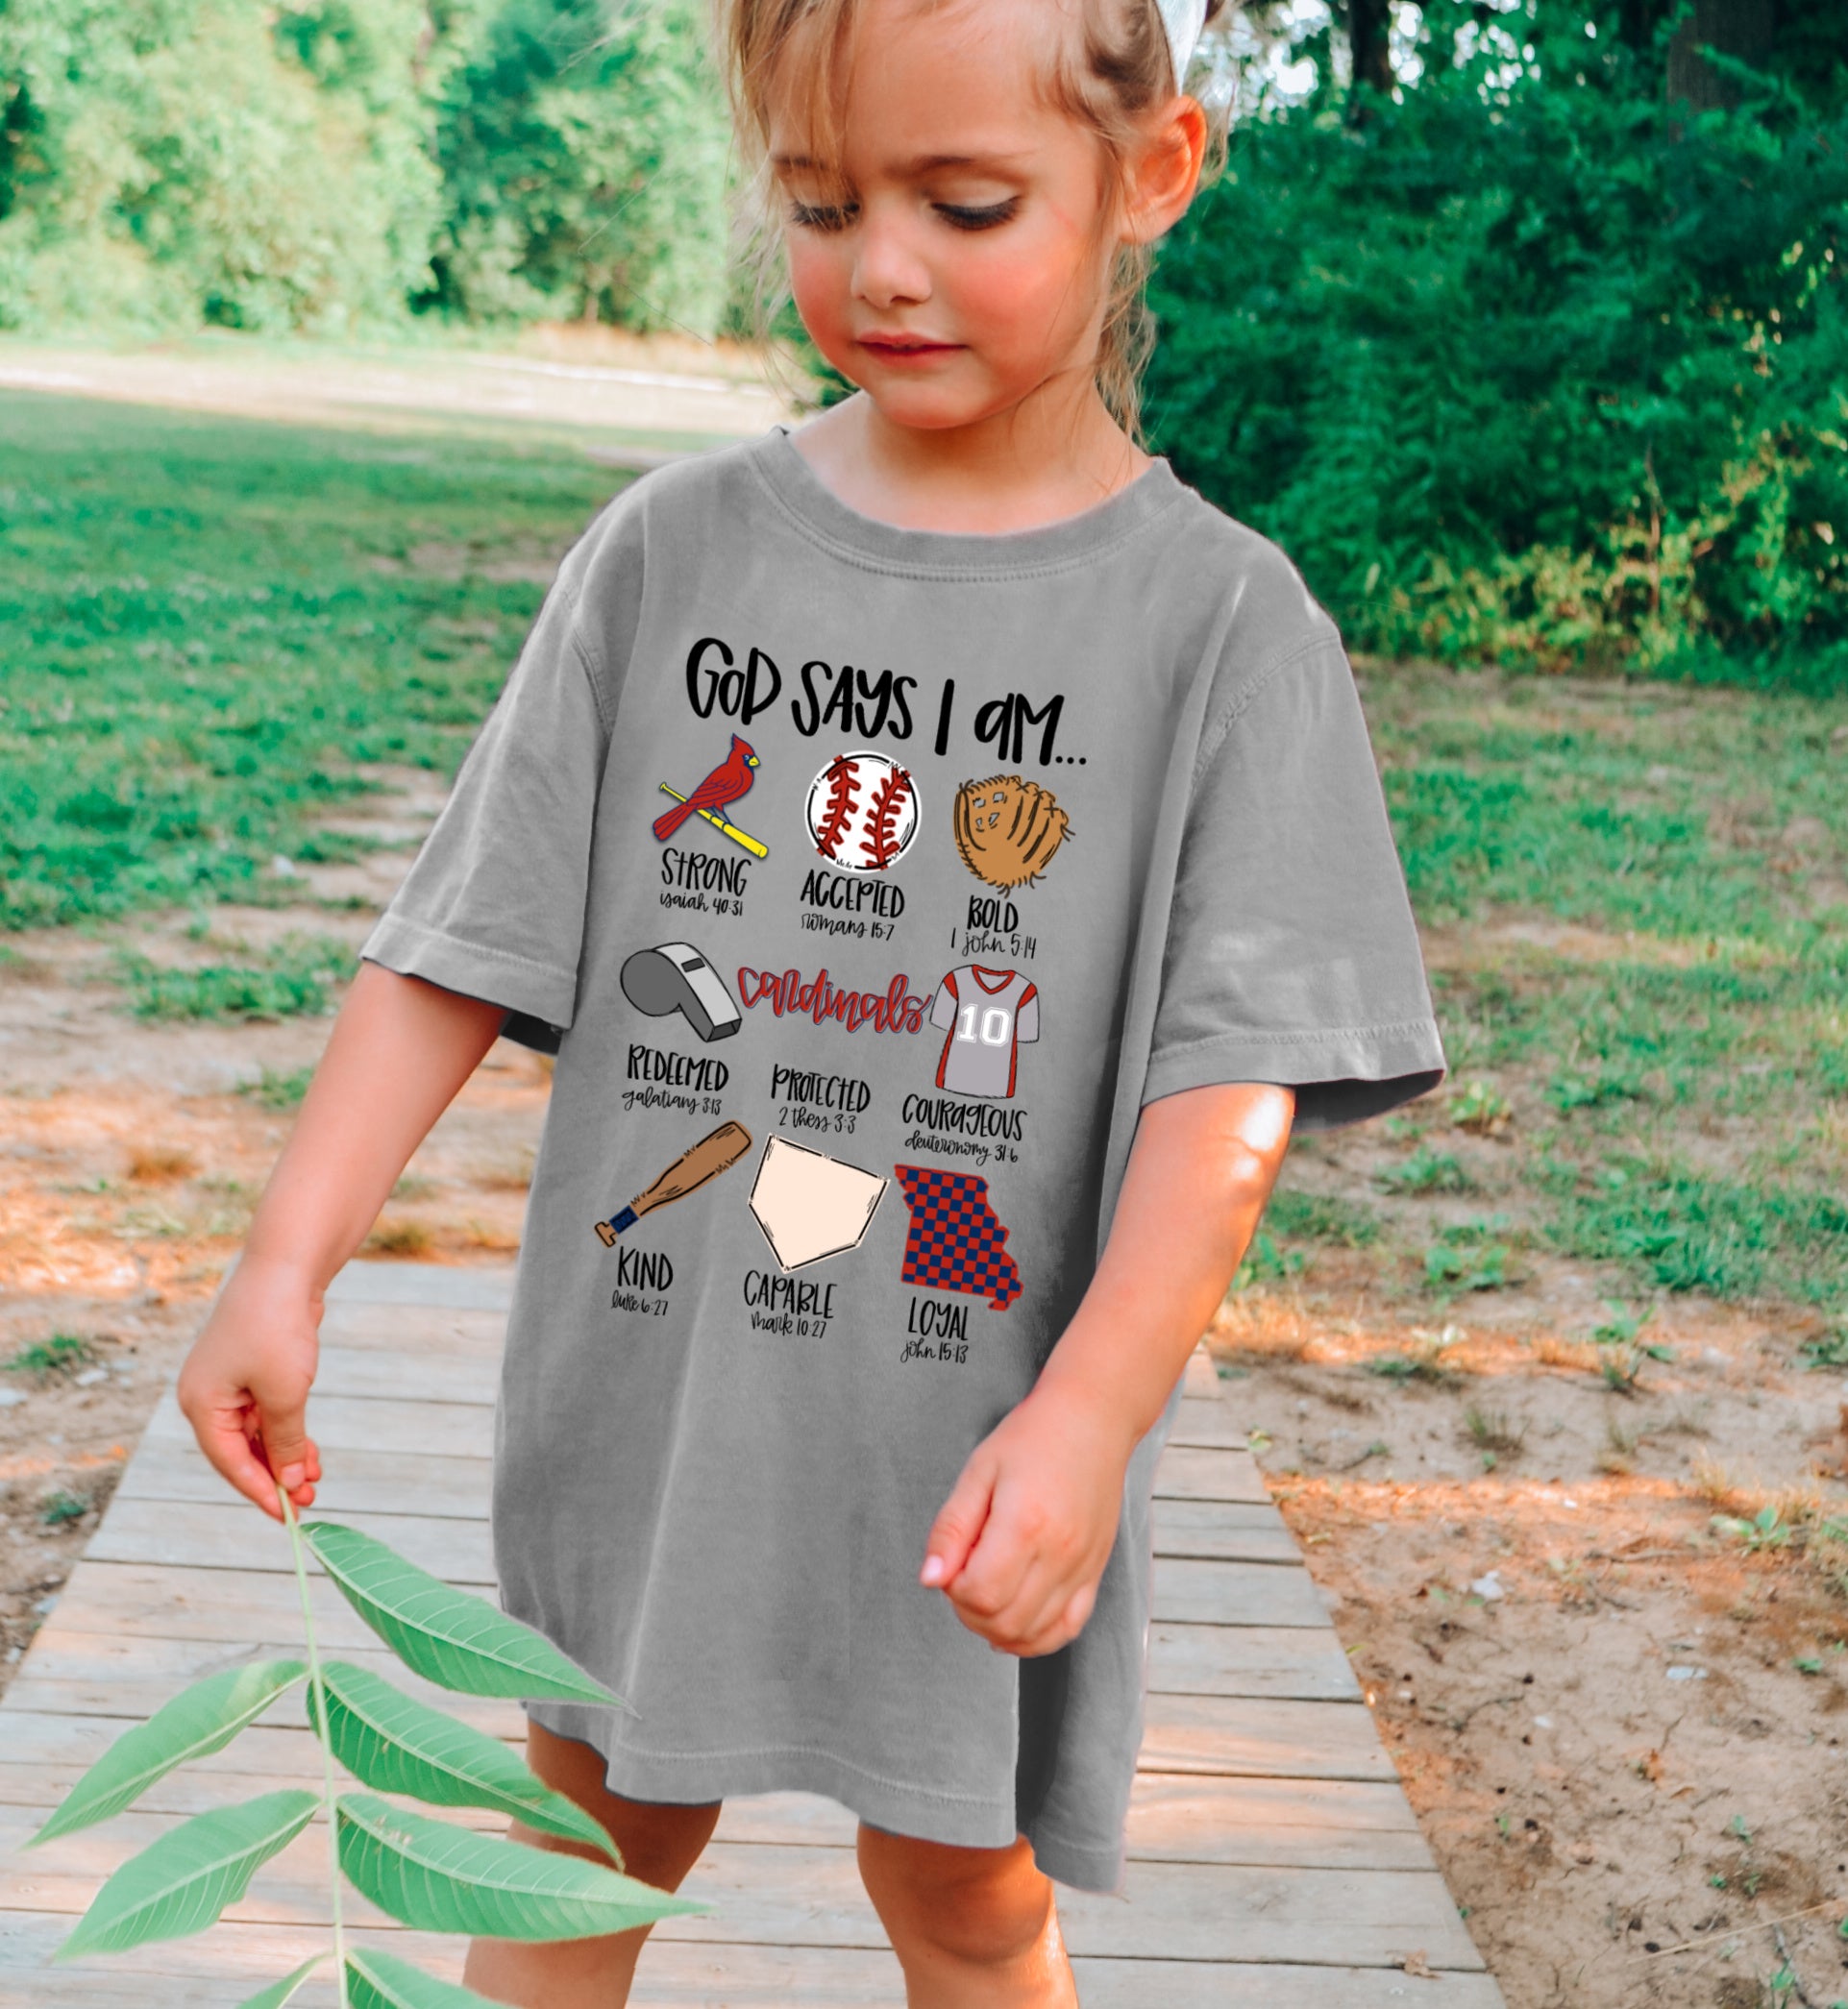 Comfort Colors God Says I Am Cardinals - Baseball Tee/ Youth and Adult